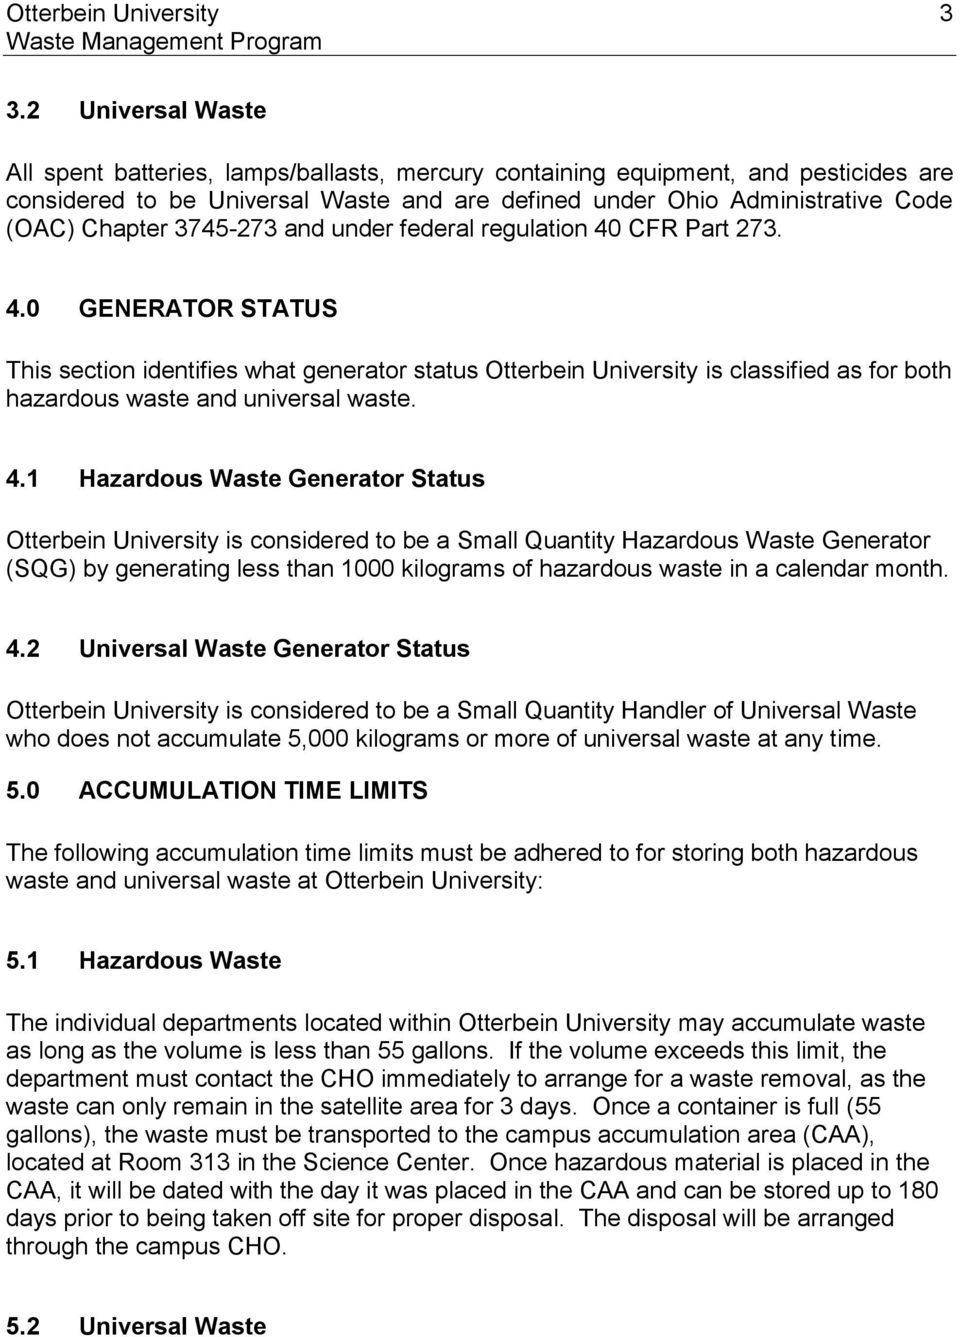 3745-273 and under federal regulation 40 CFR Part 273. 4.0 GENERATOR STATUS This section identifies what generator status Otterbein University is classified as for both hazardous waste and universal waste.